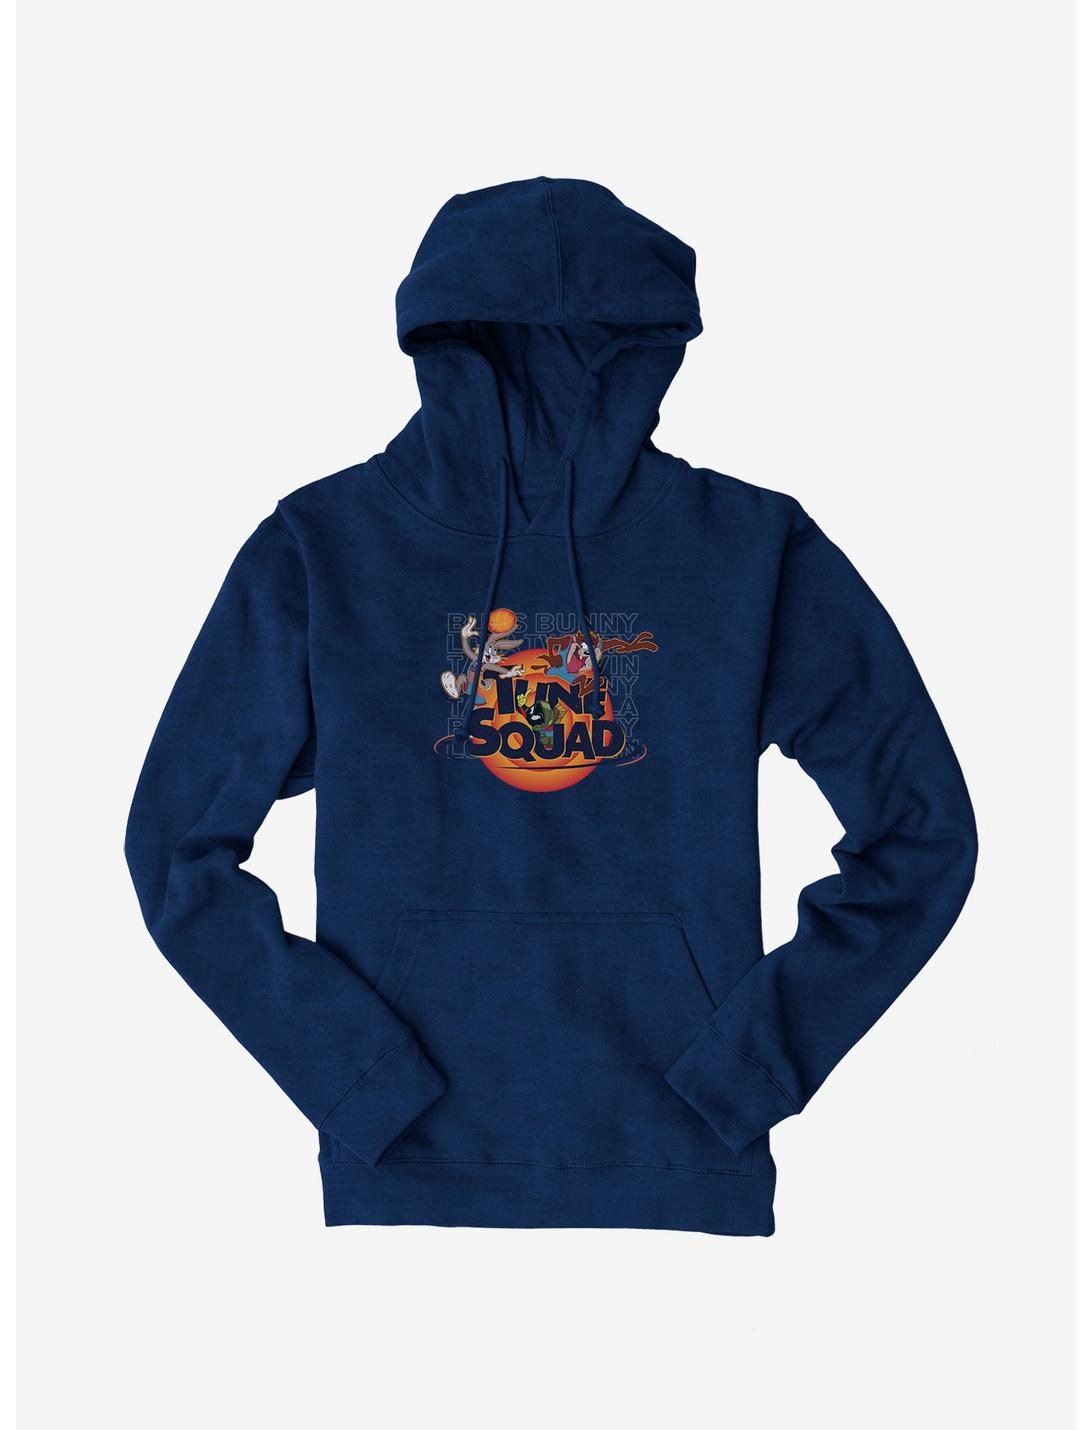 Space Jam: A New Legacy Bugs Bunny, Marvin The Martian, And Taz Tune Squad Hoodie, , hi-res